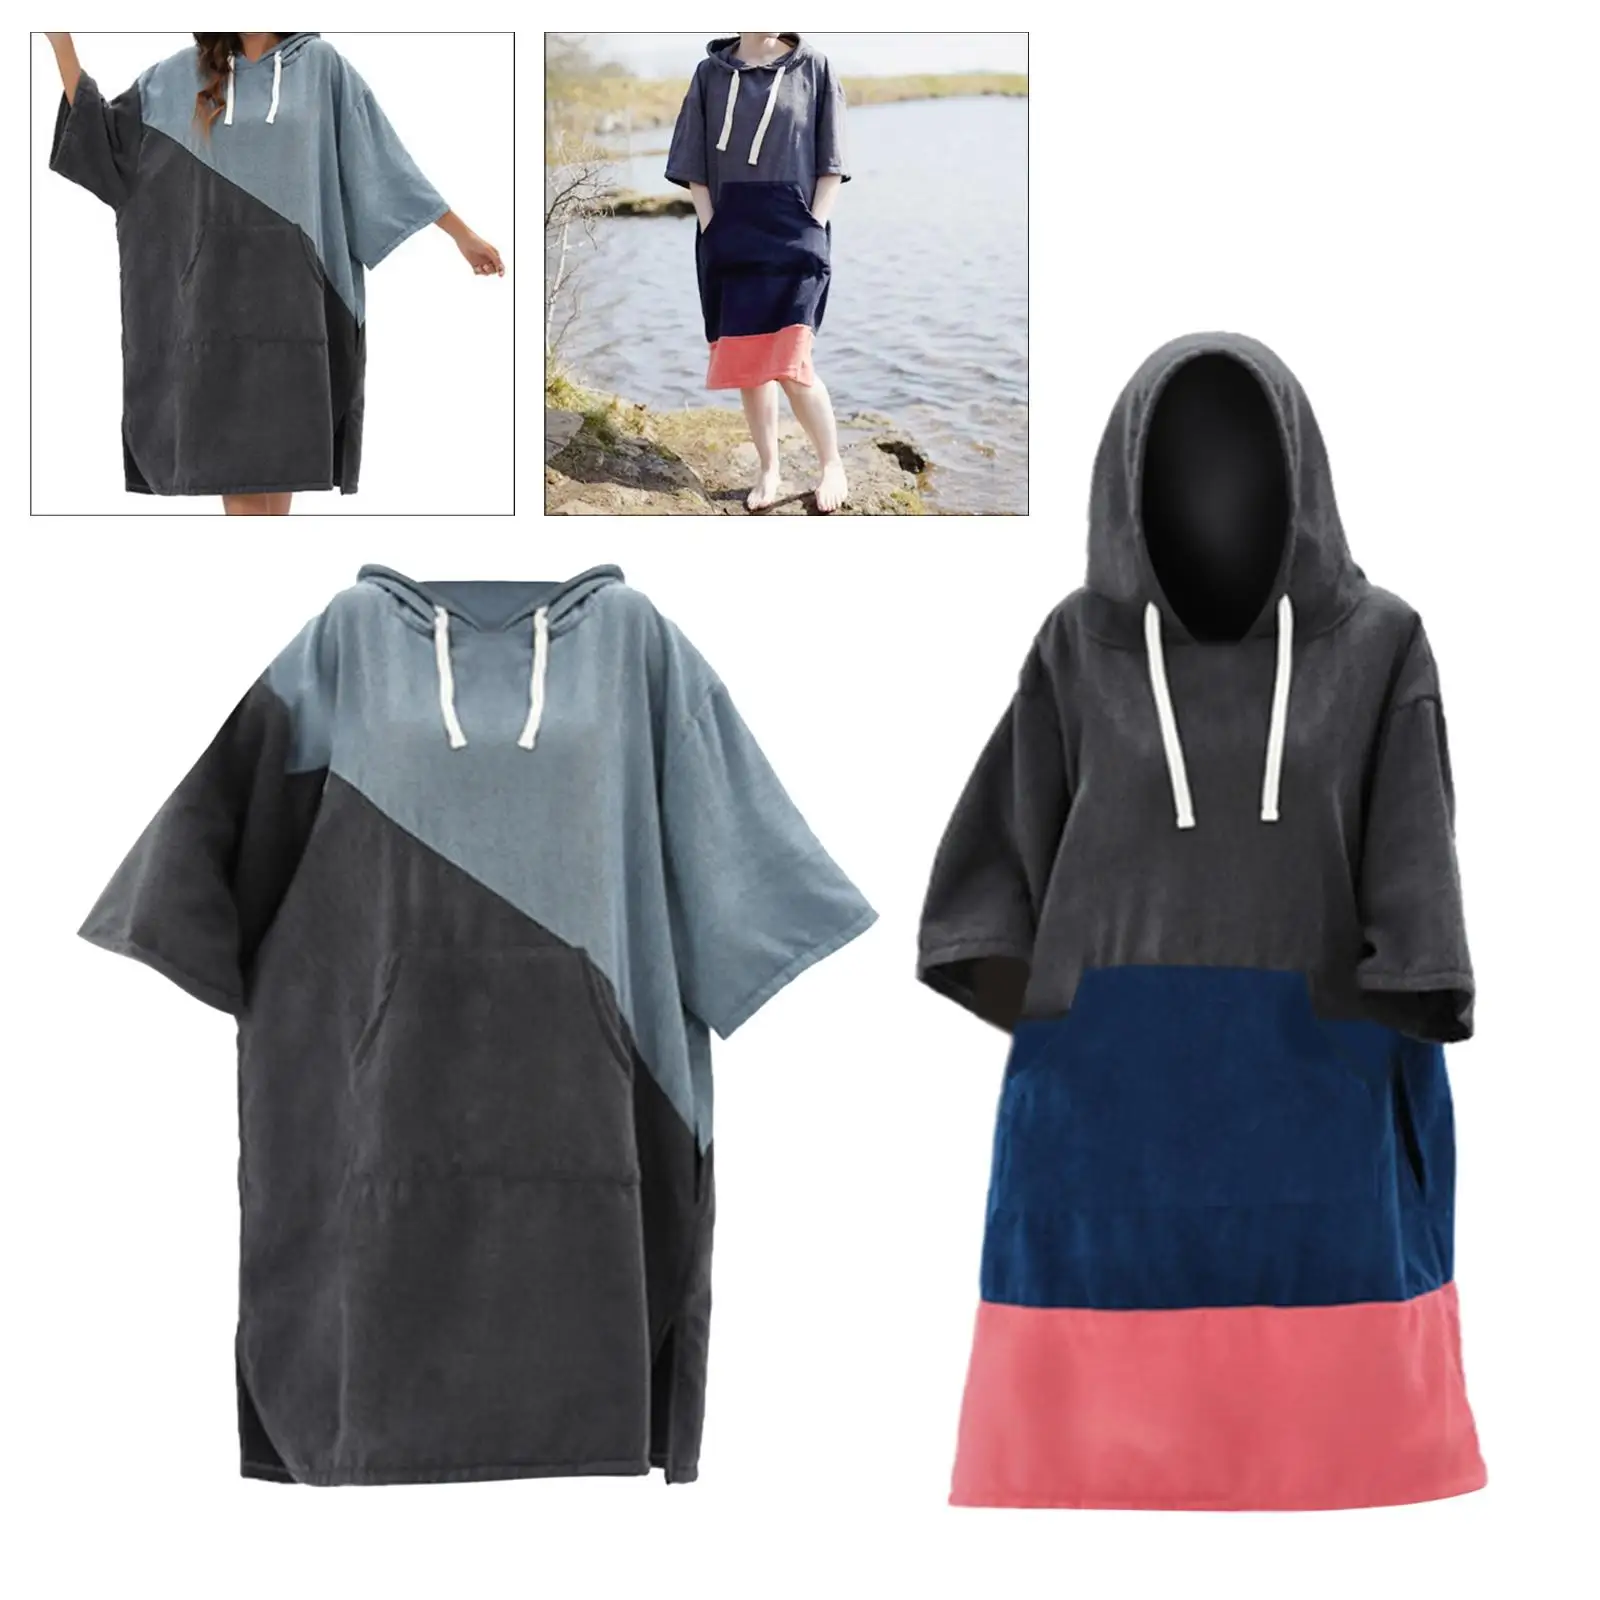 Microfiber Quick Dry Wetsuit Changing Robe Poncho towel With Hood for Swim Beach towel Lightweight Beach Surf Poncho